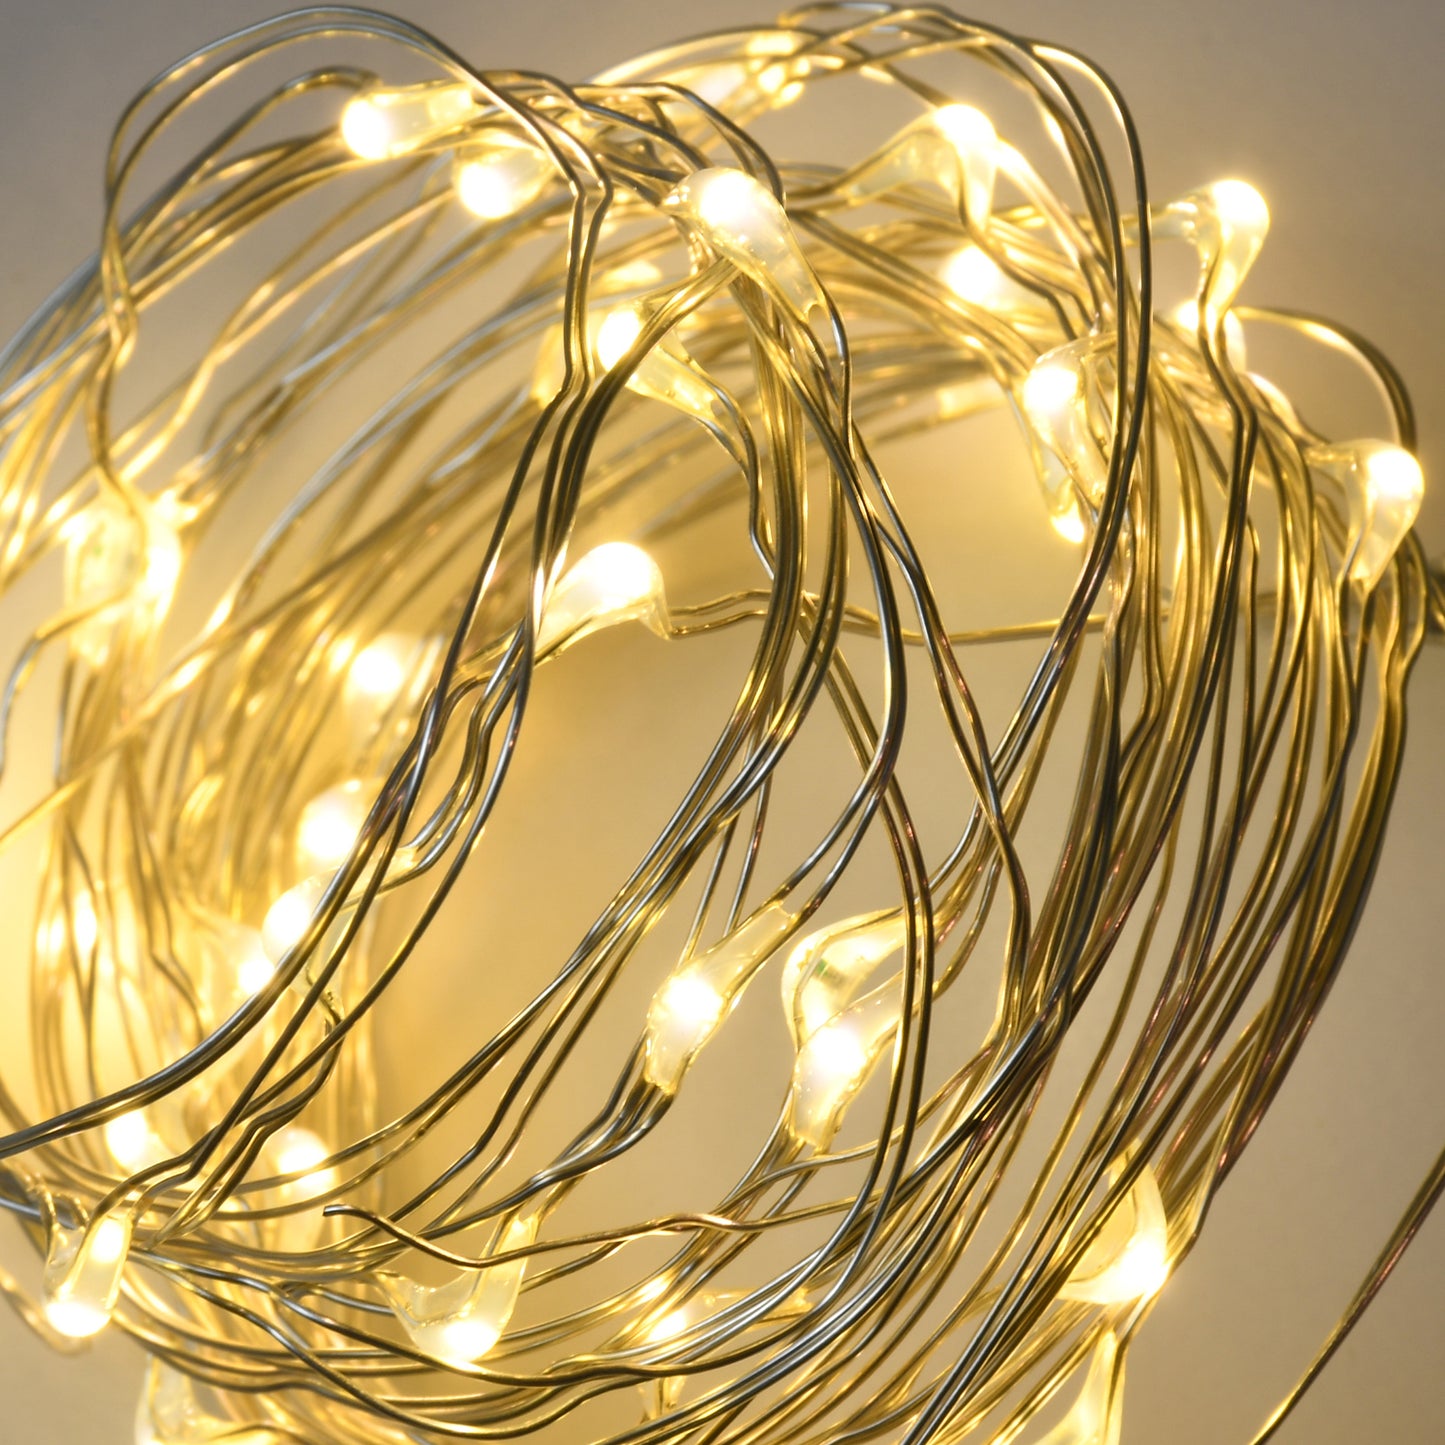 Battery Operated LED Fairy String Lights - Set of 2 - Warm White